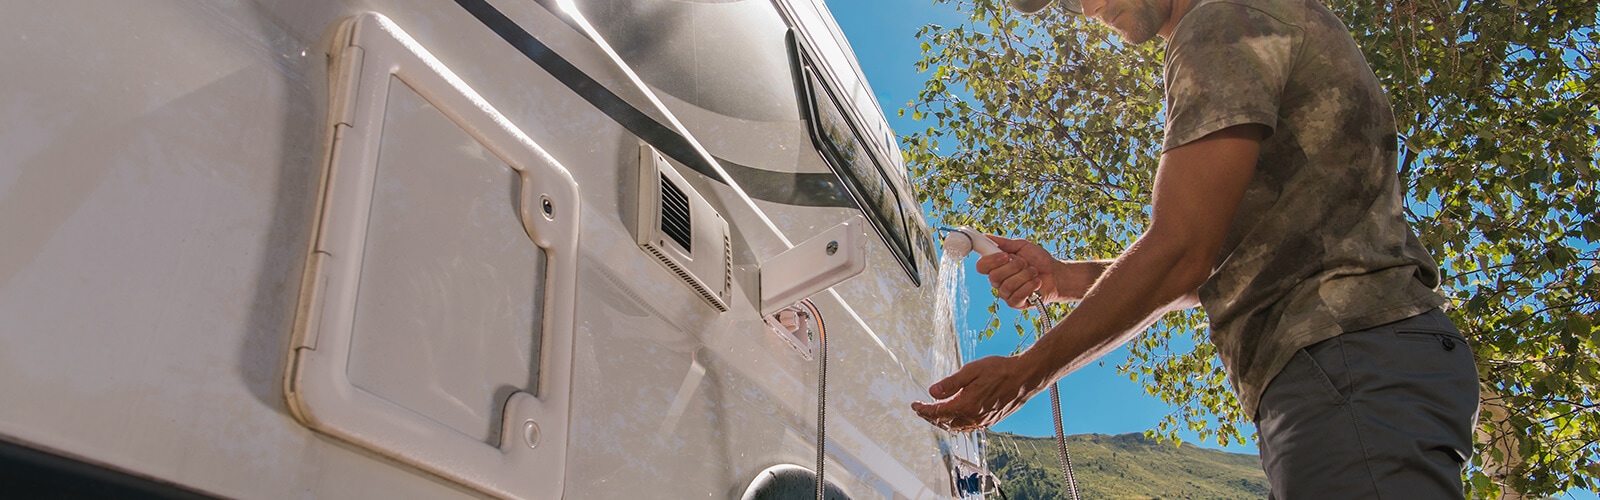 A camper with a water faucet, representing low water pressure issues and the need for solutions.